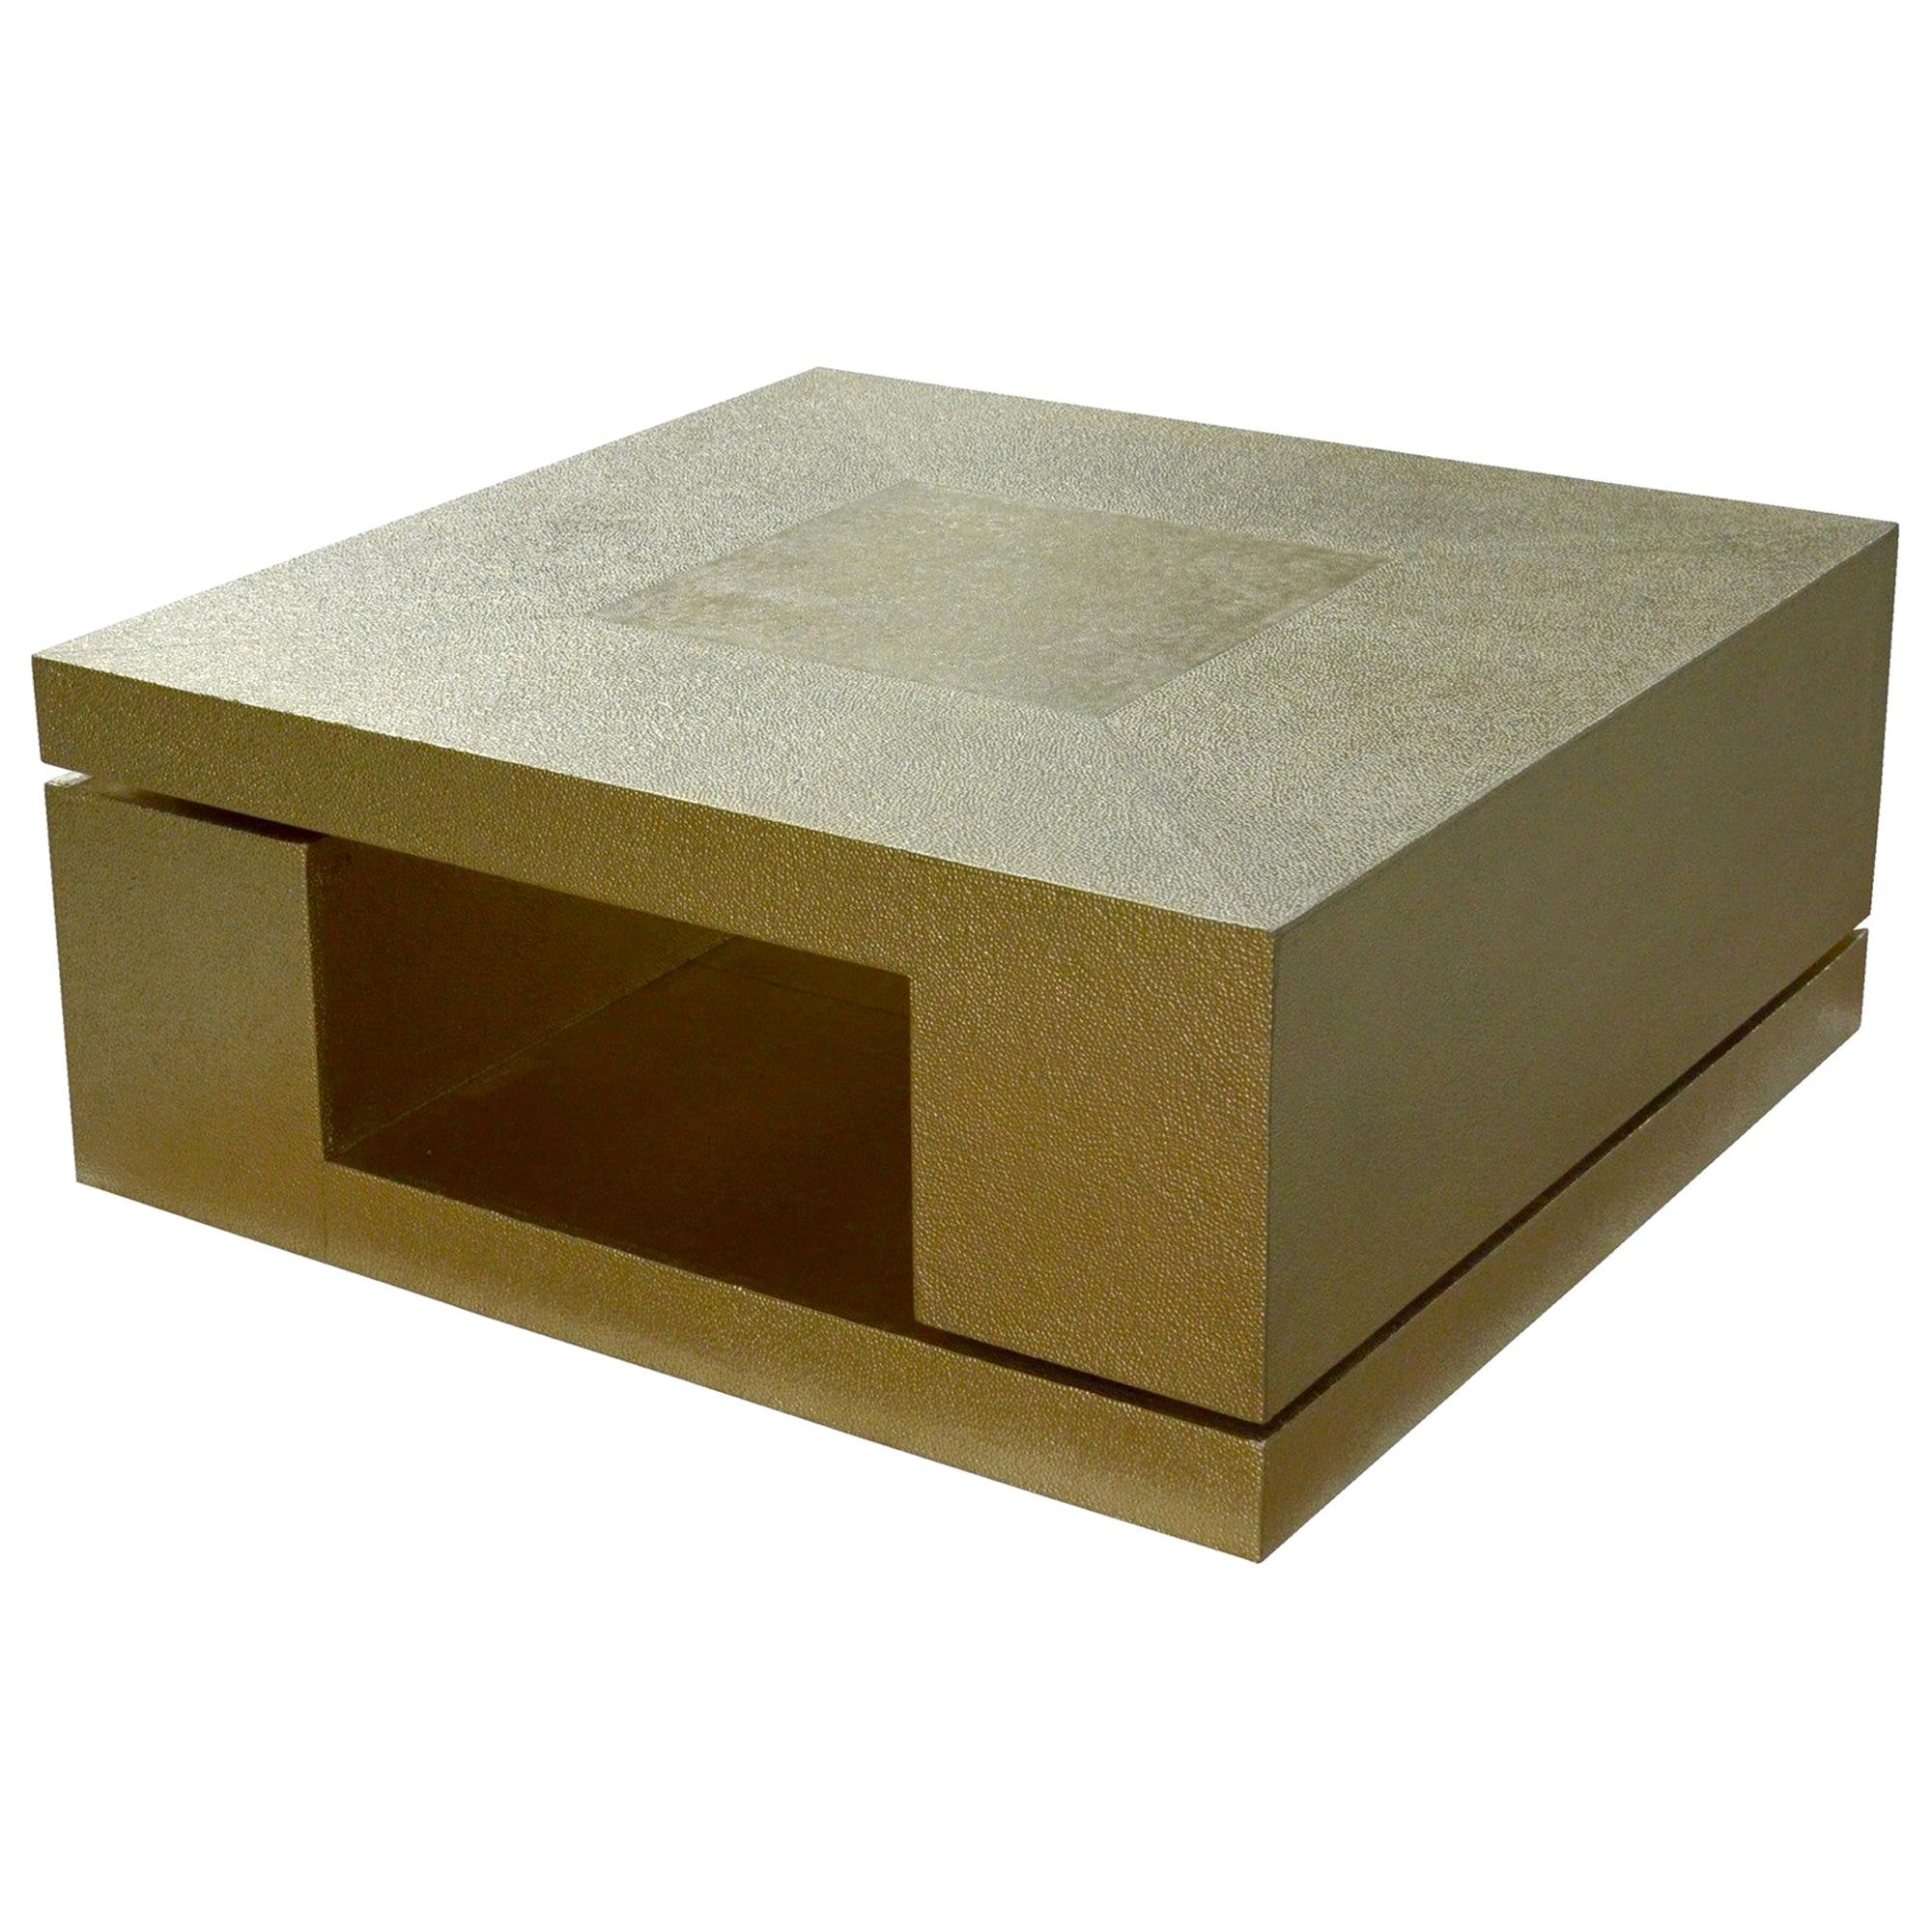 LX2 Table in Brass Clad Over MDF Handcrafted in India by Stephanie Odegard For Sale